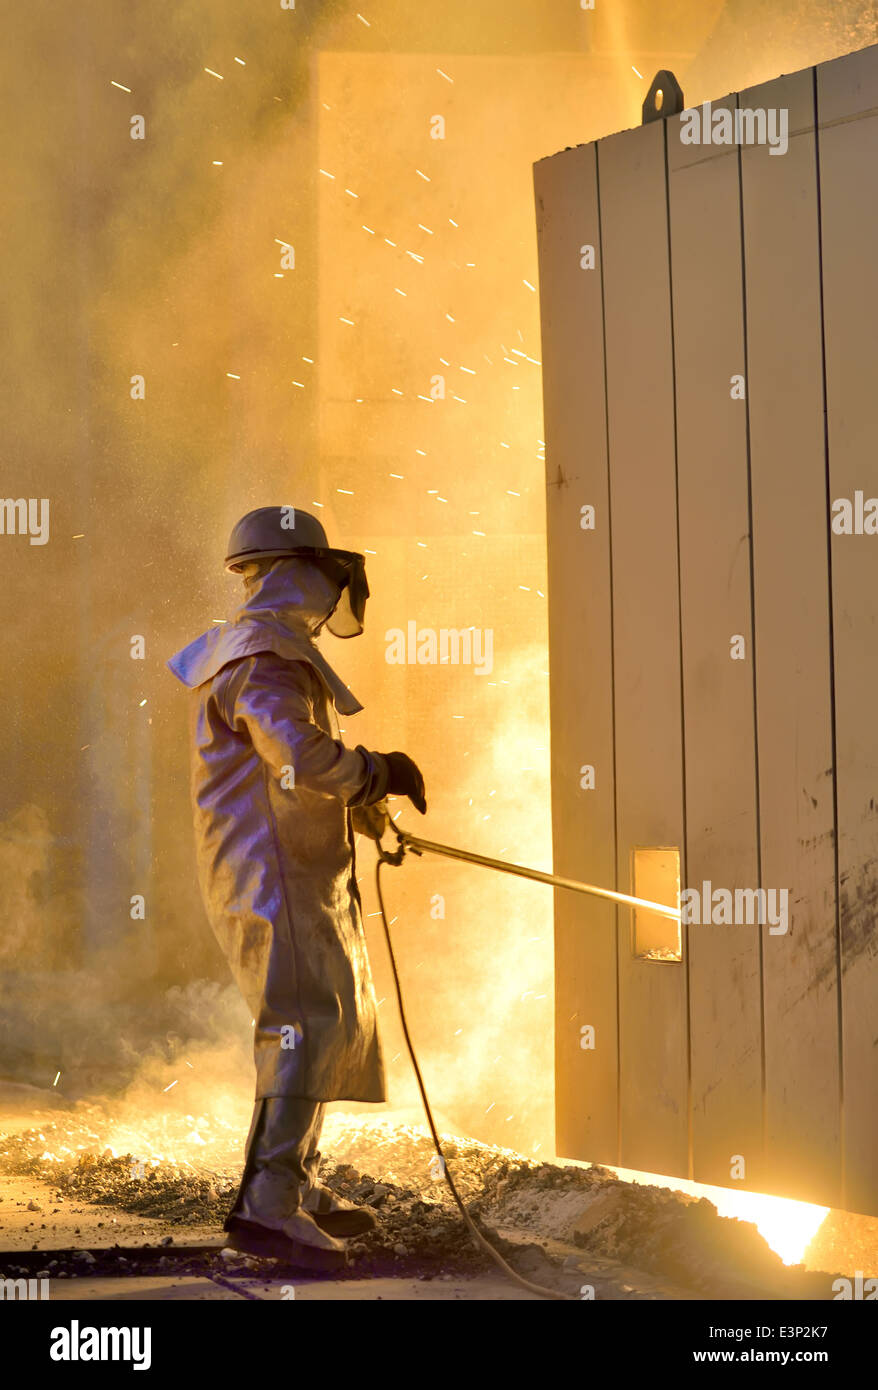 A steel worker takes a sample from oven Stock Photo